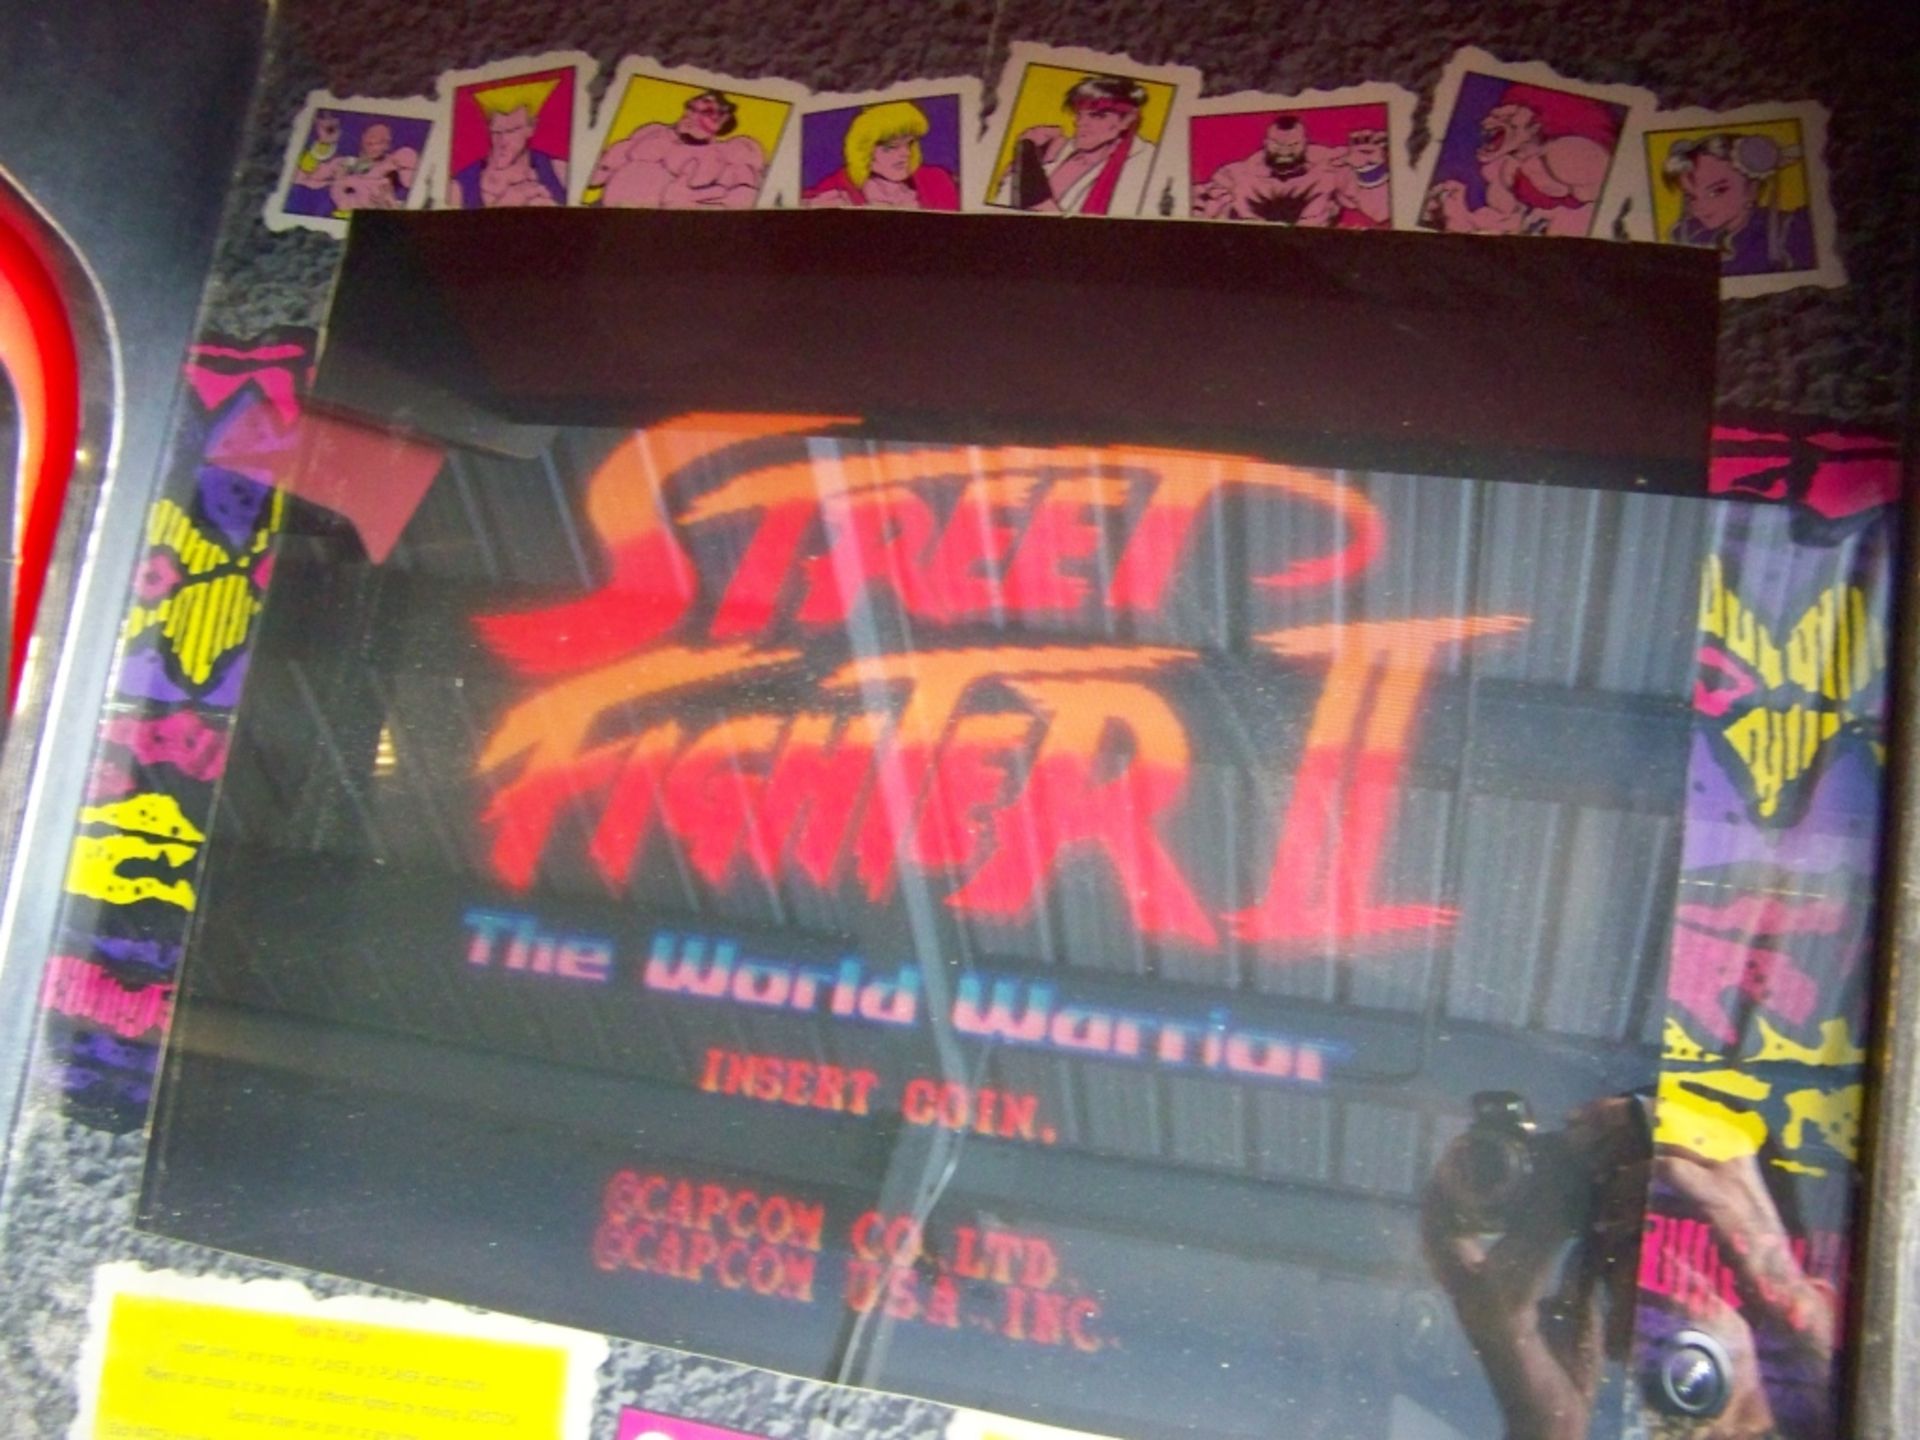 STREET FIGHTER II CAPCOM ARCADE GAME Item is in used condition. Evidence of wear and commercial